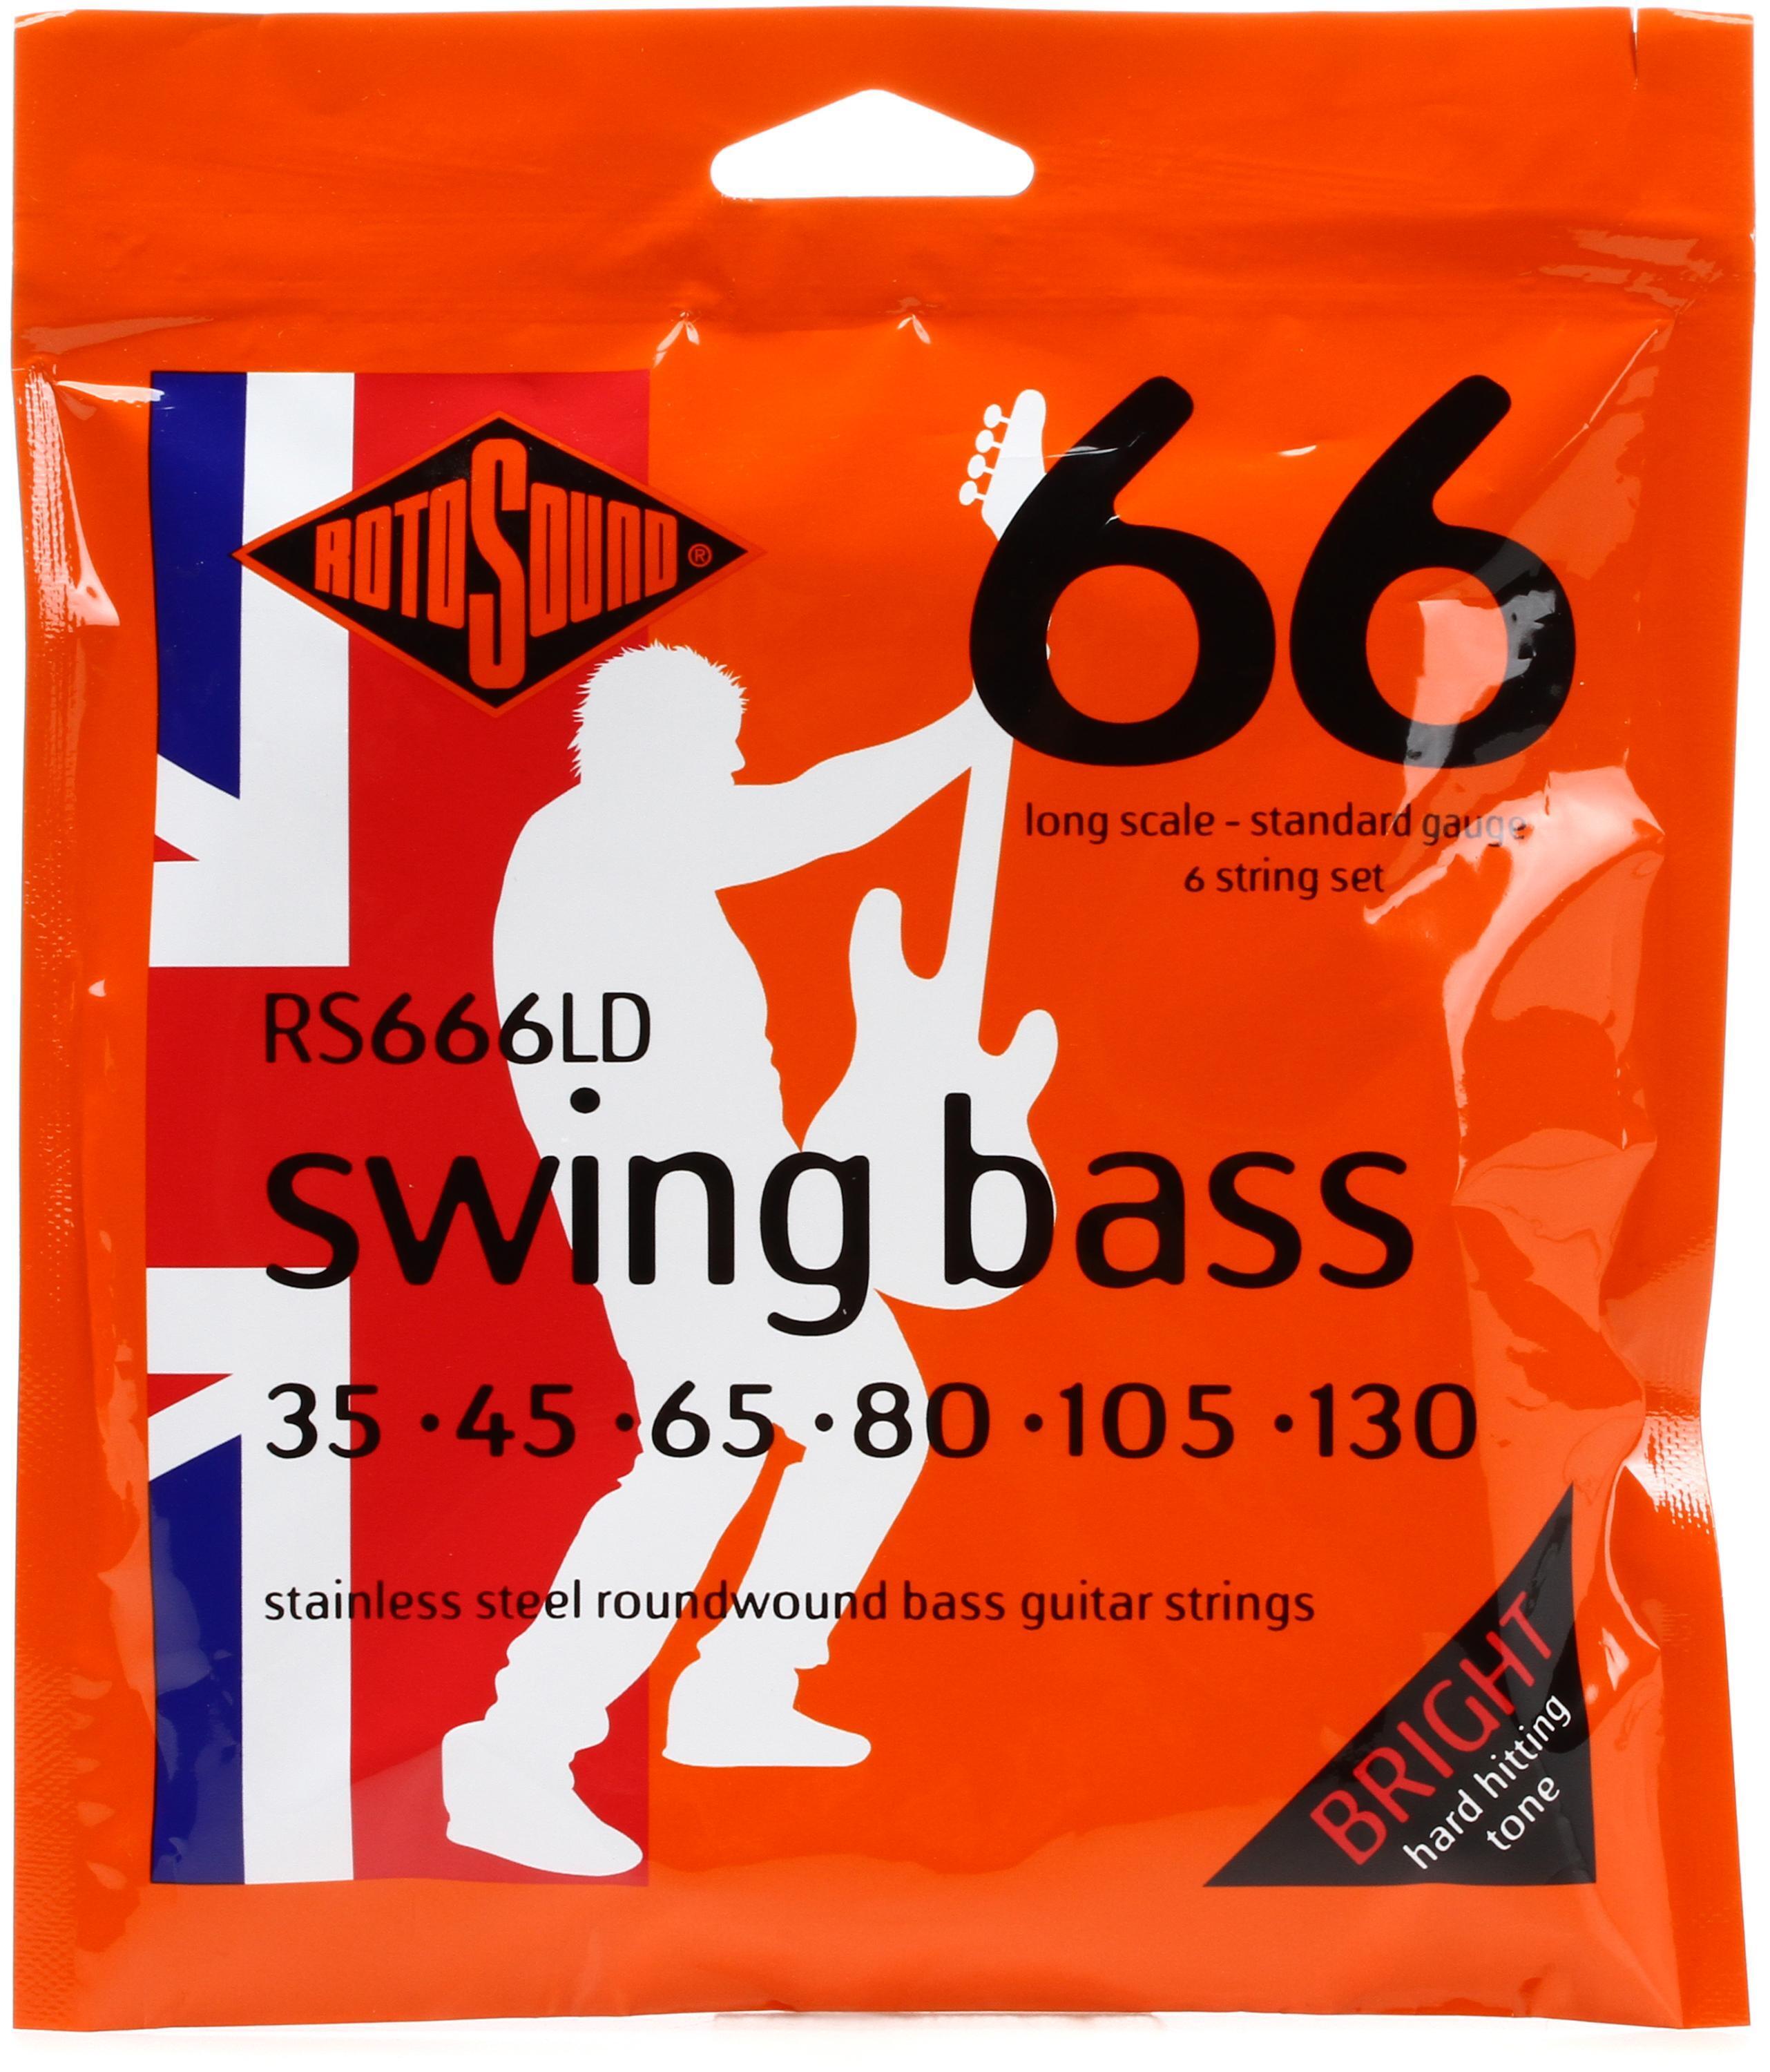 Rotosound RS666LD Swing Bass 66 Stainless Steel Roundwound Bass Guitar  Strings - .035-.130 Standard Long Scale 6-string